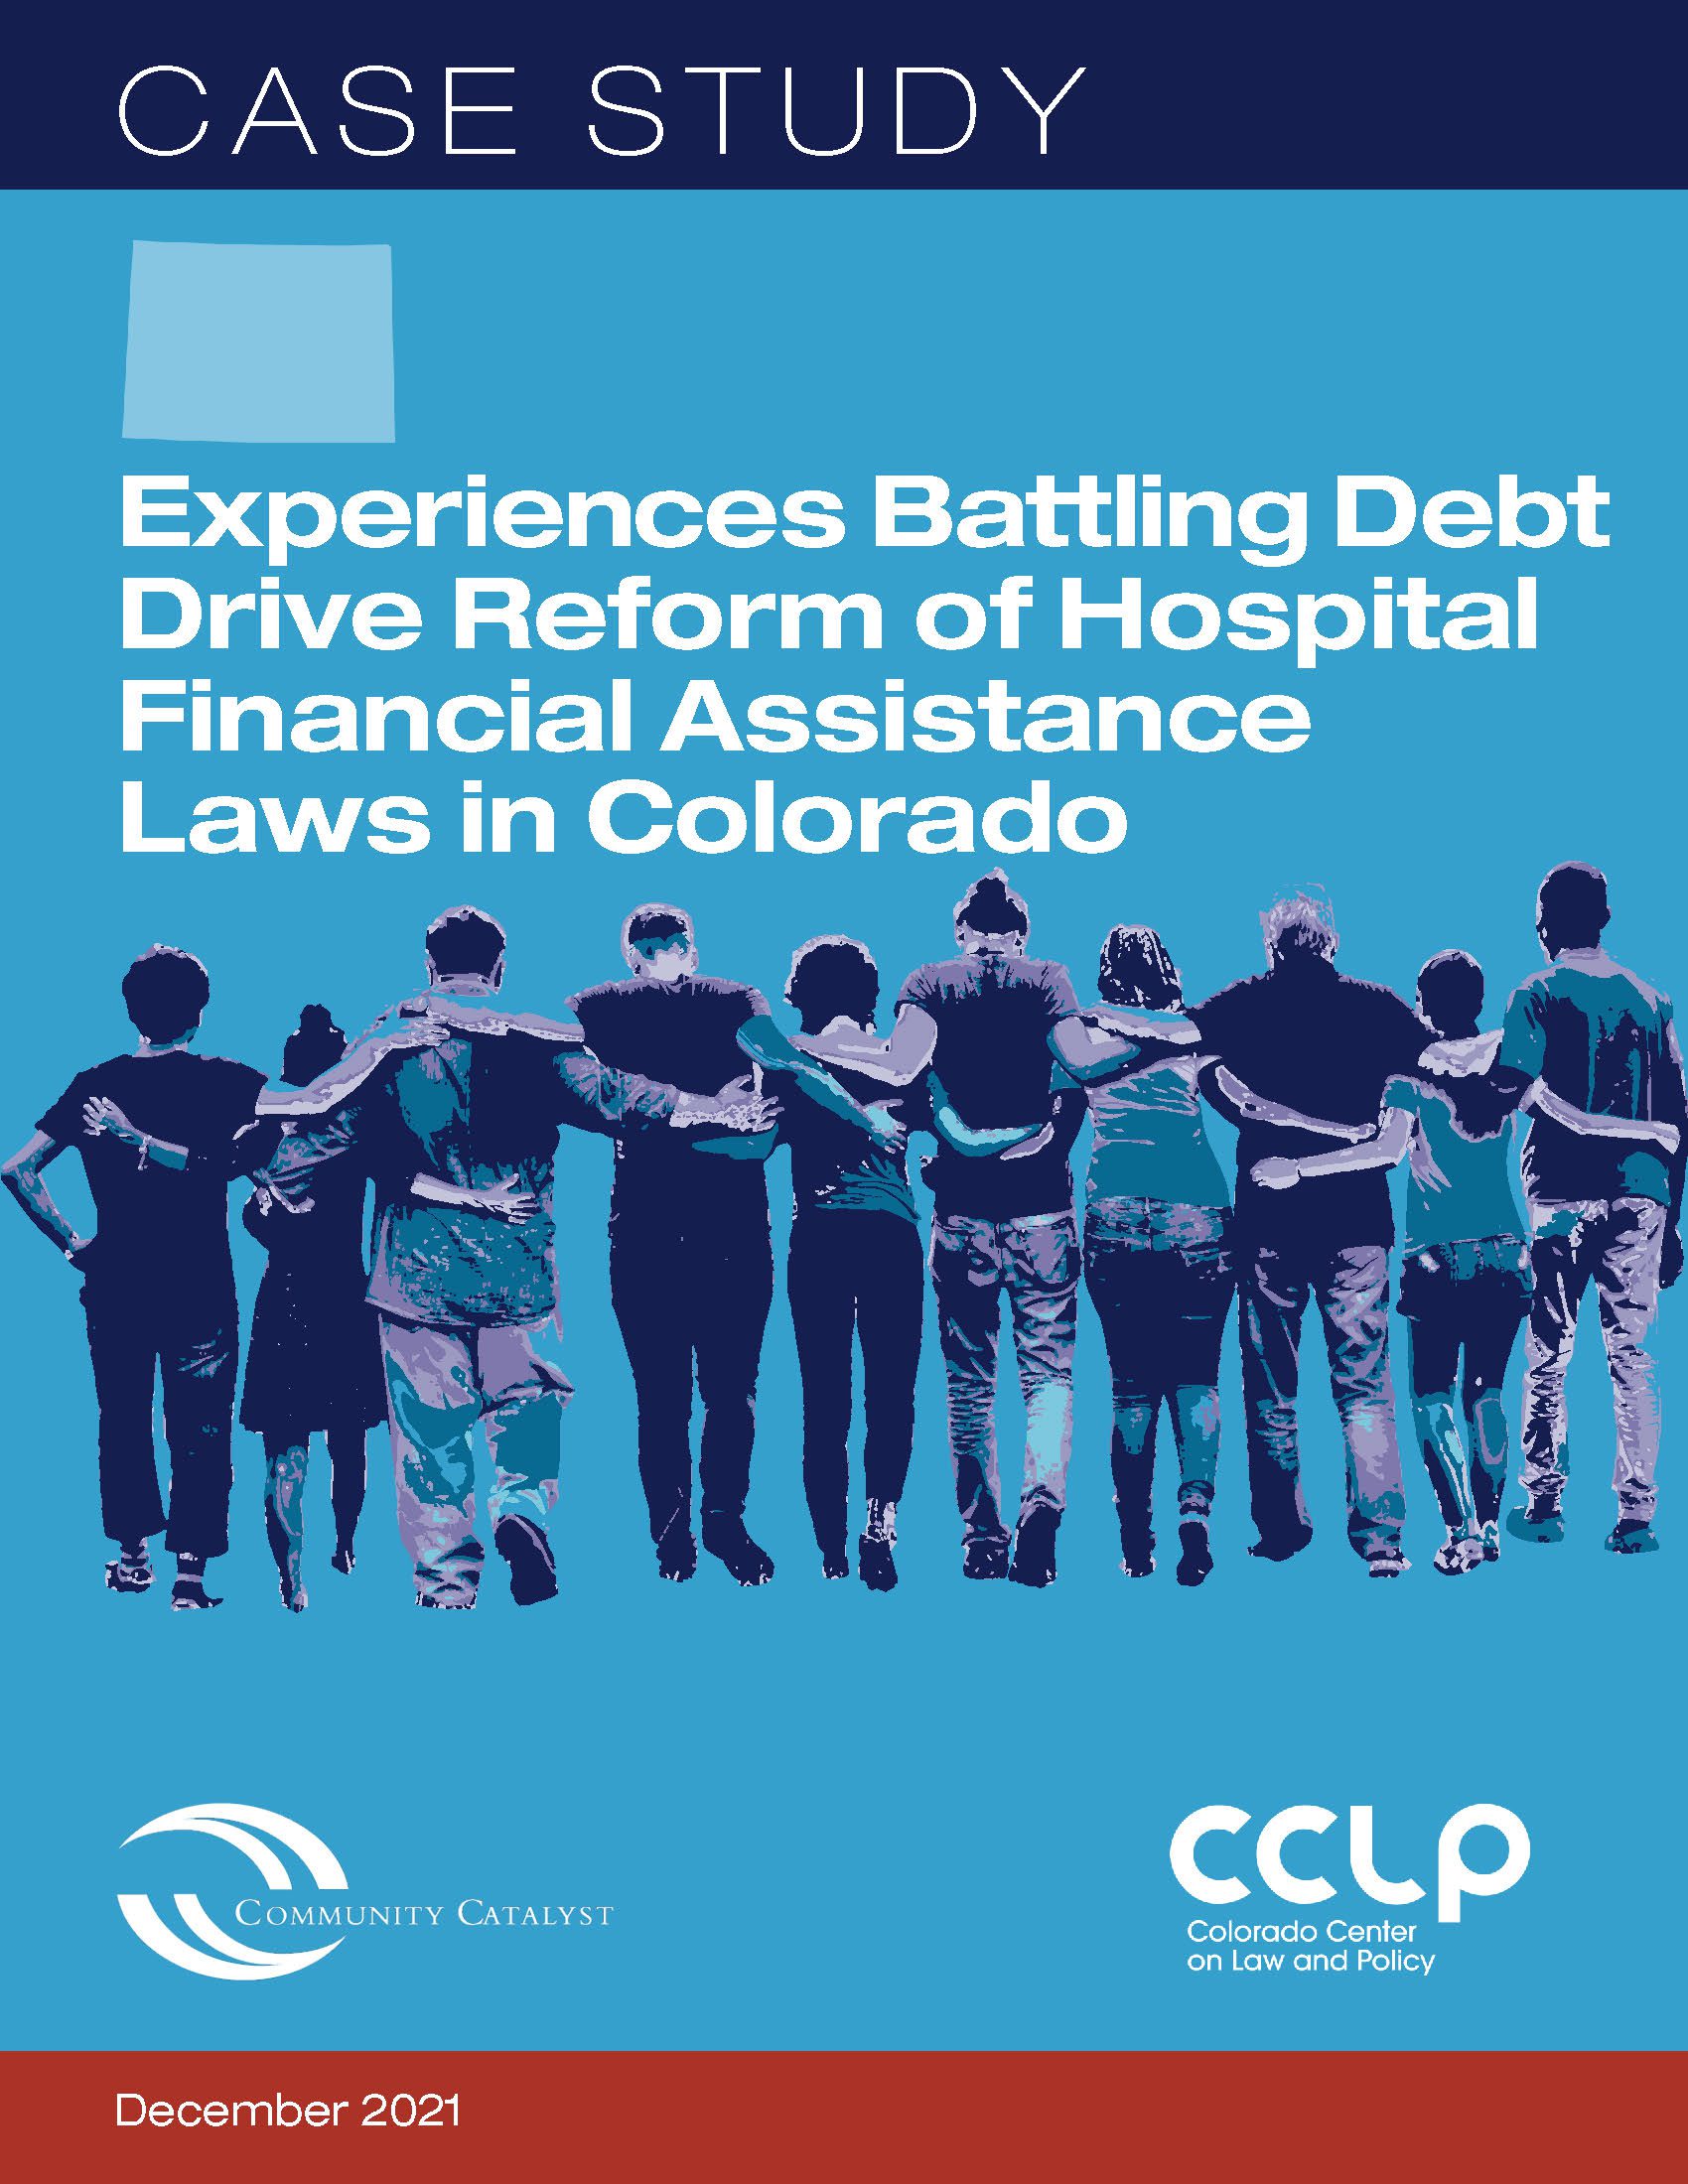 Case Study Cover - Community Catalyst - Experiences battling debt drive reform of hospital financial assistance laws in Colorado